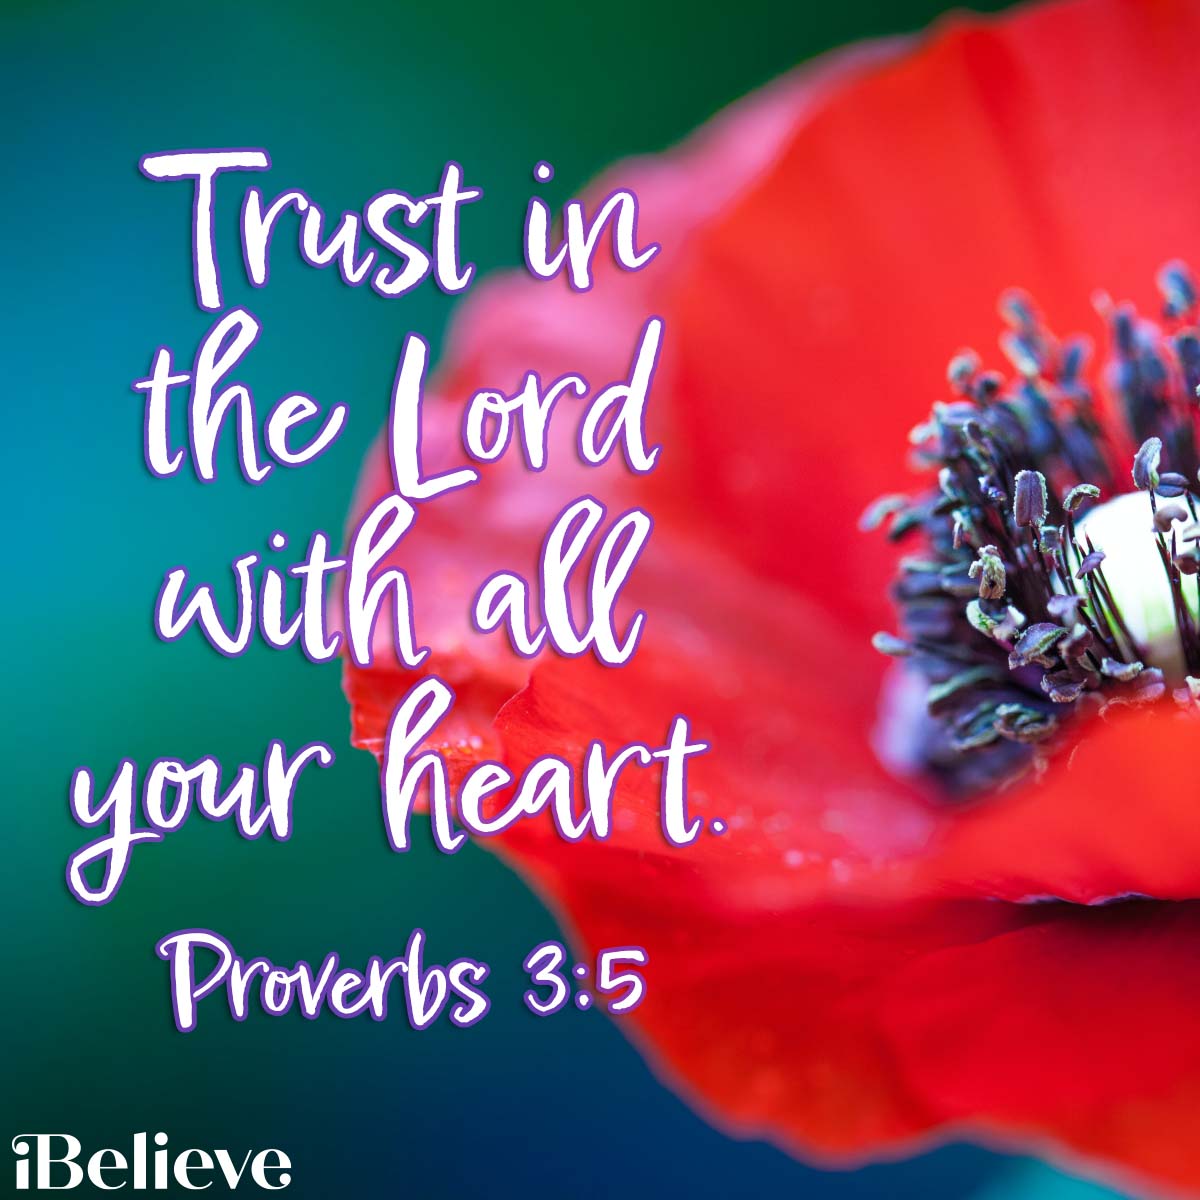 Proverbs 3:5, inspirational image